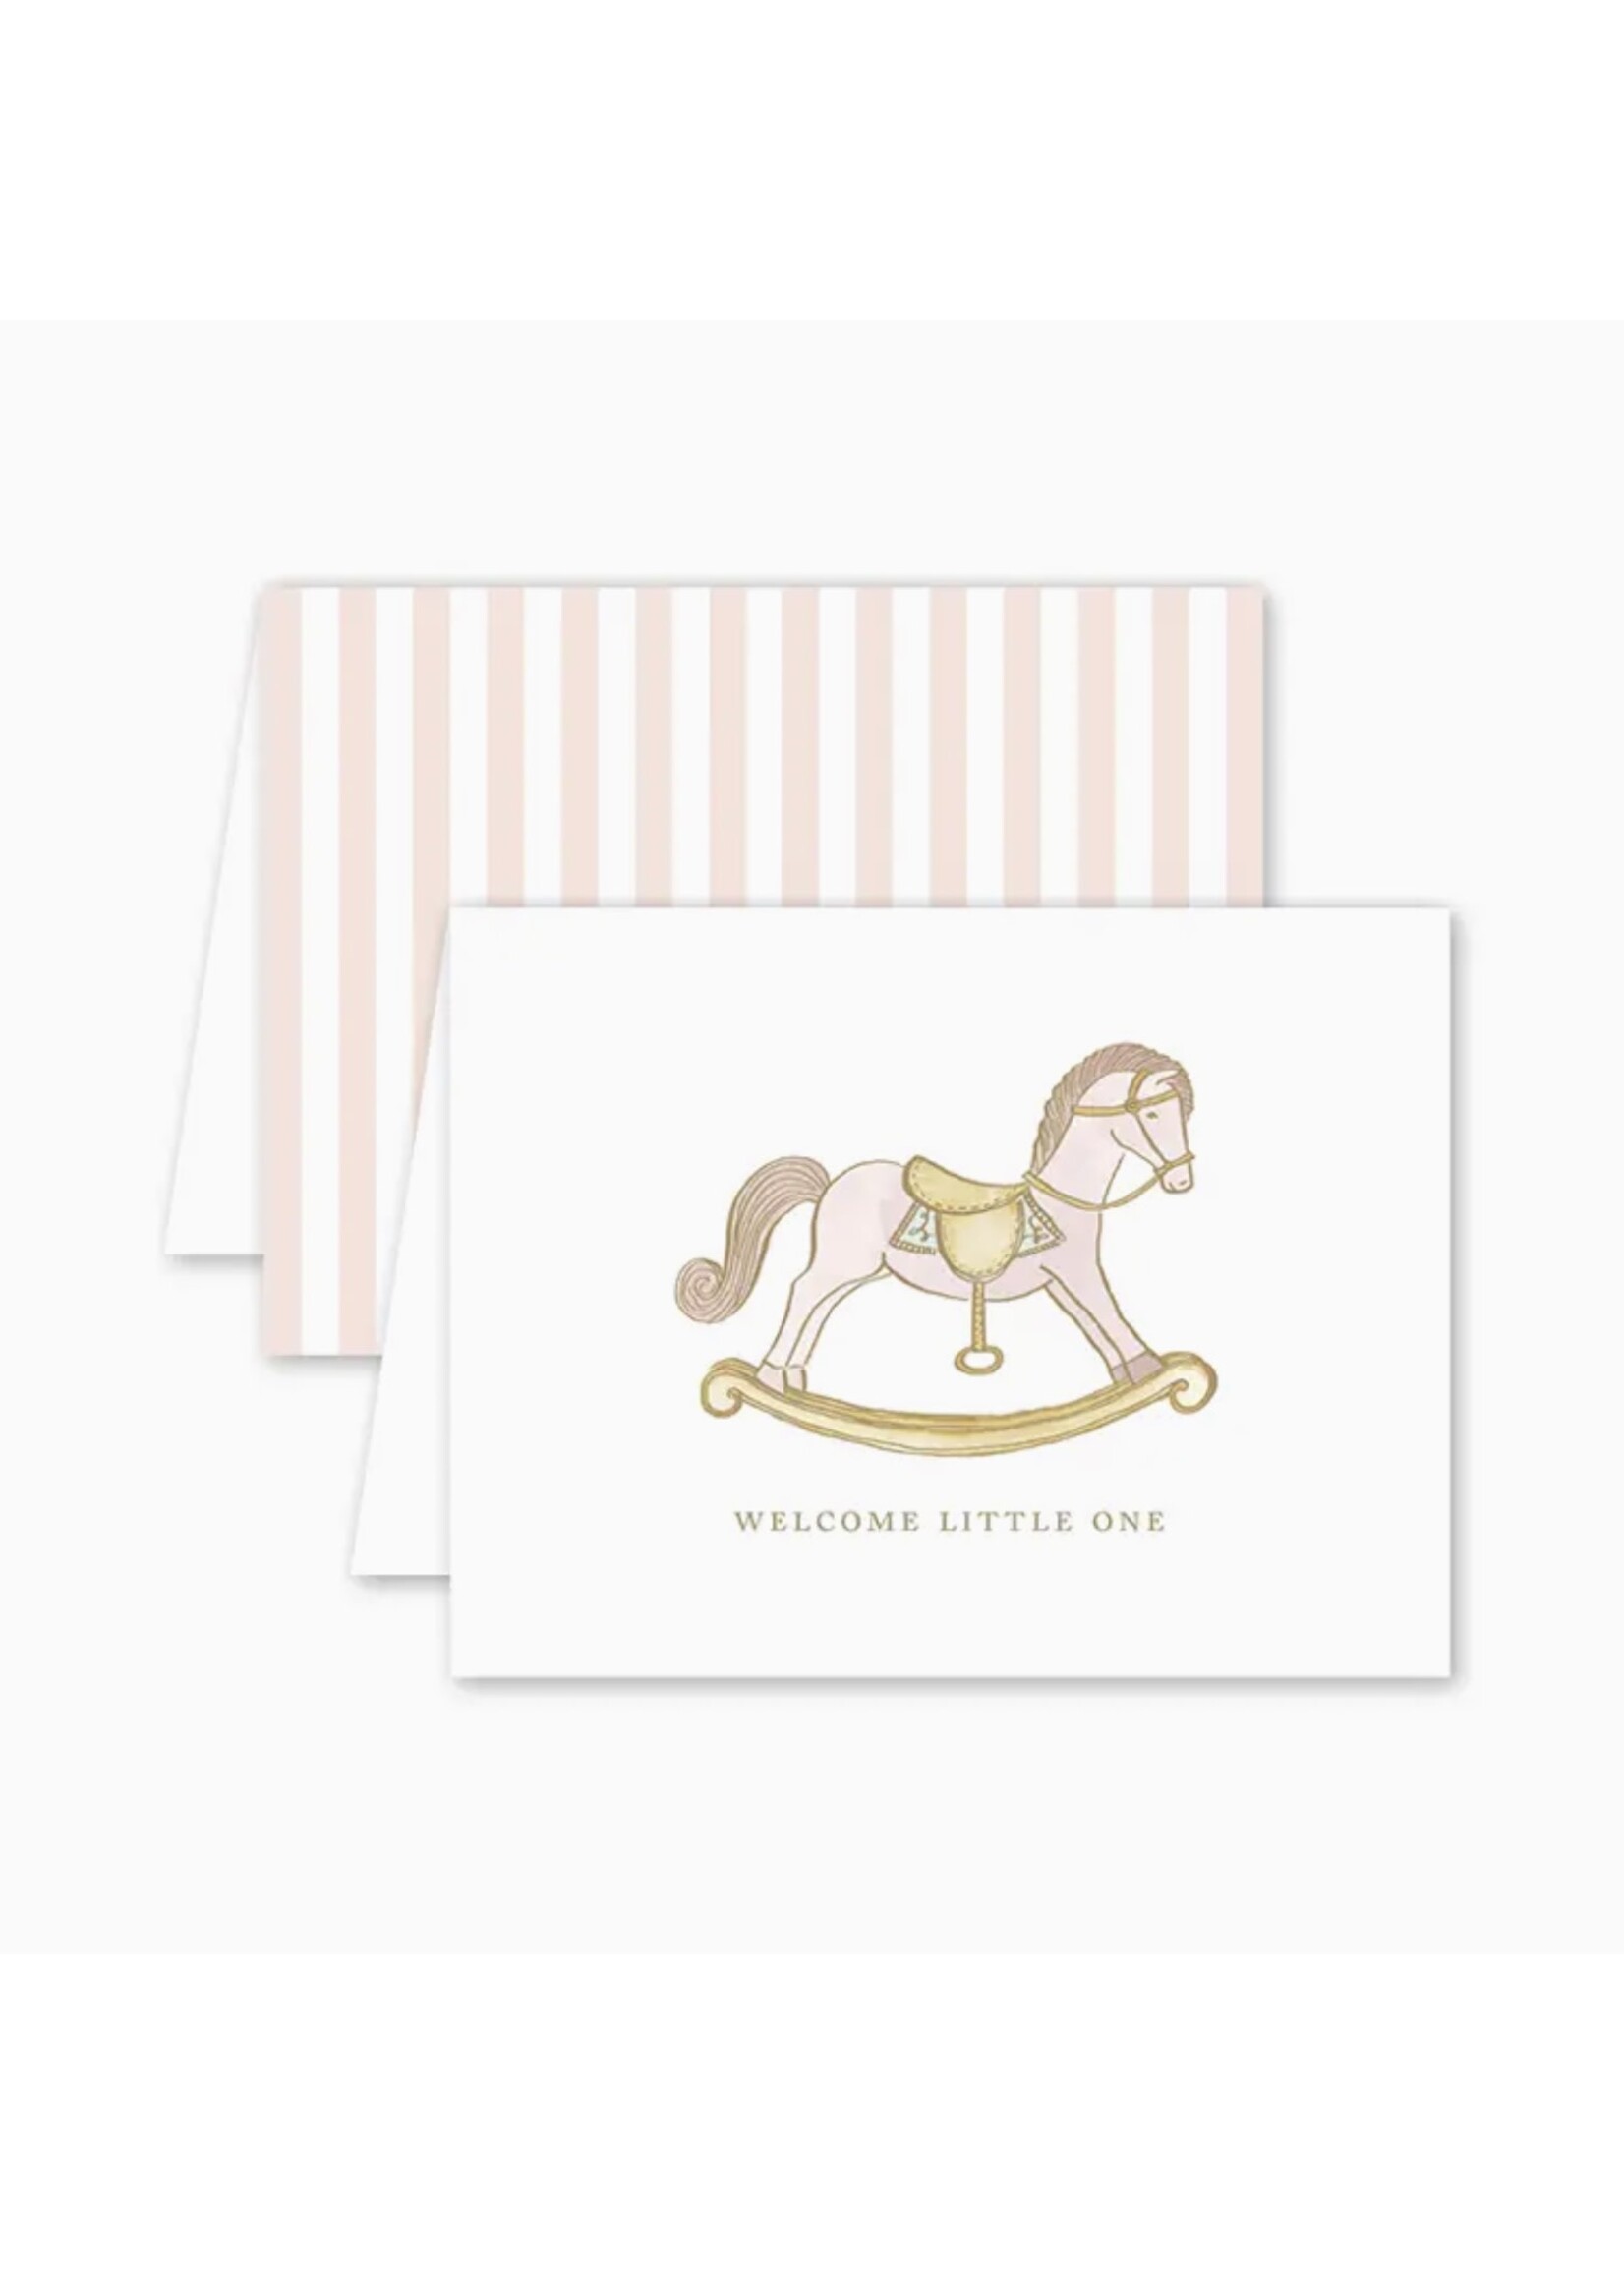 Dogwood Hill Card - Petit Jouet Cheval Baby